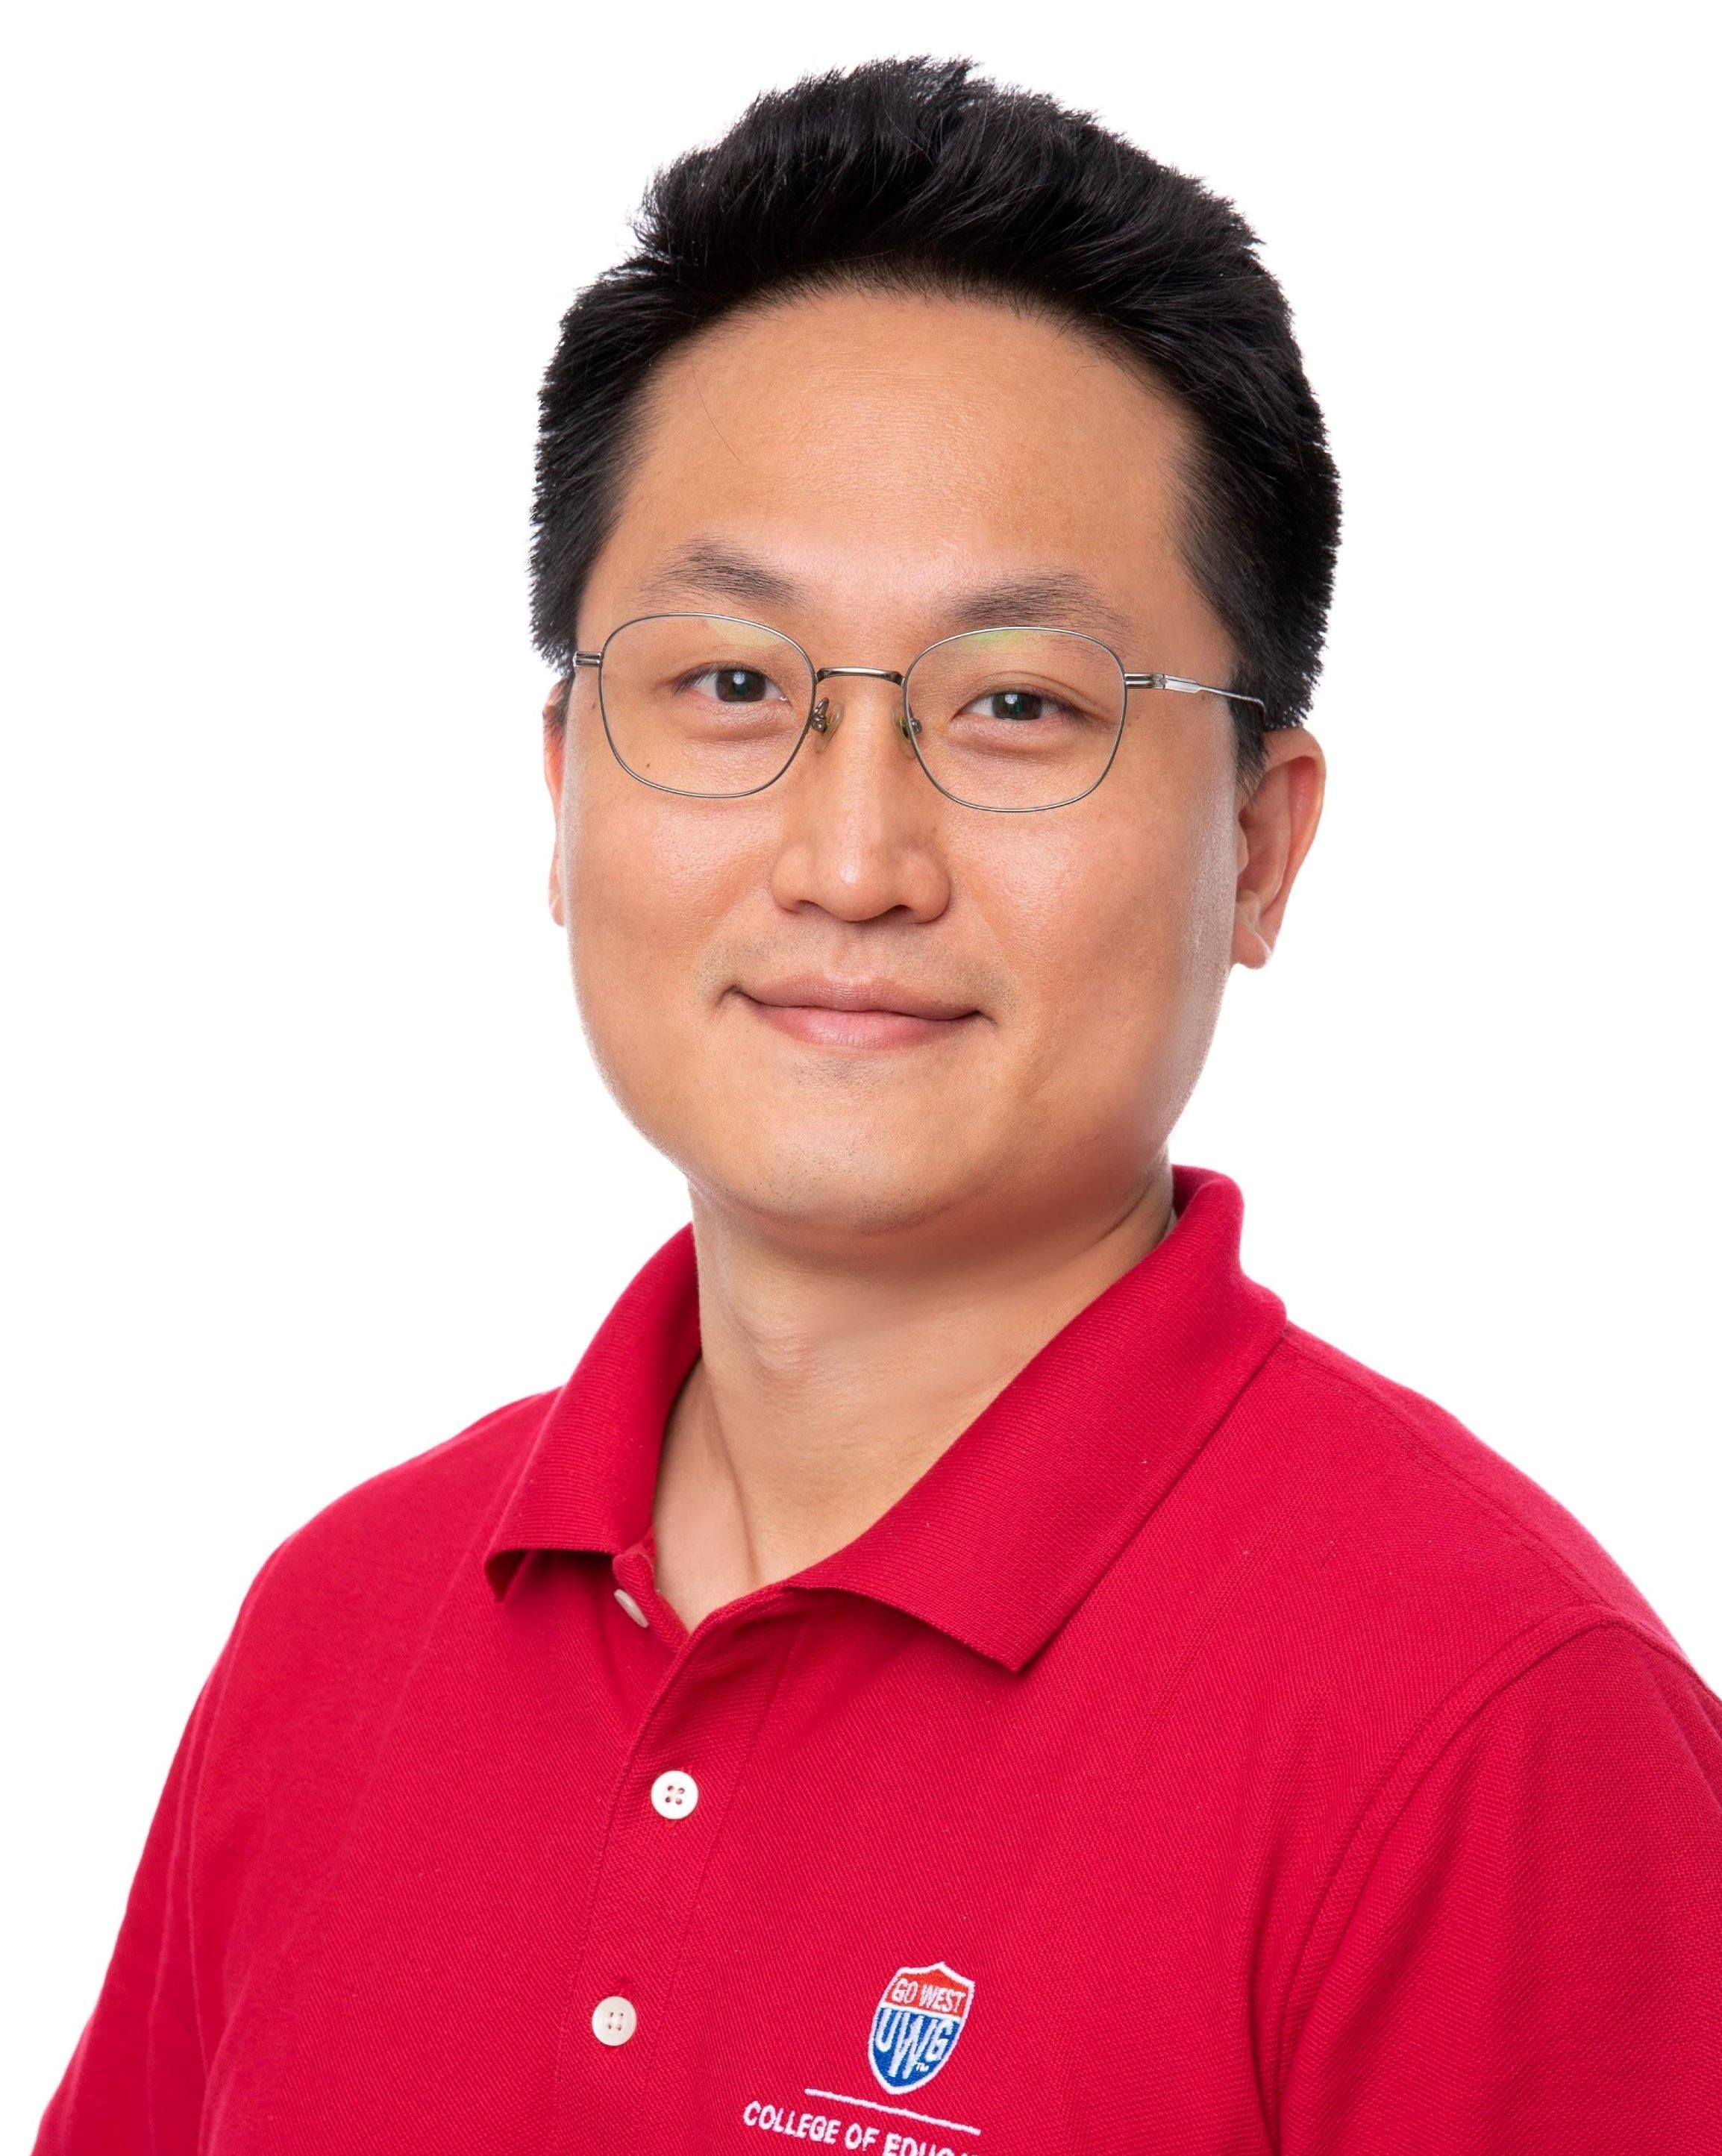 Photo of Wooyoung (William) Jang, Ph.D.